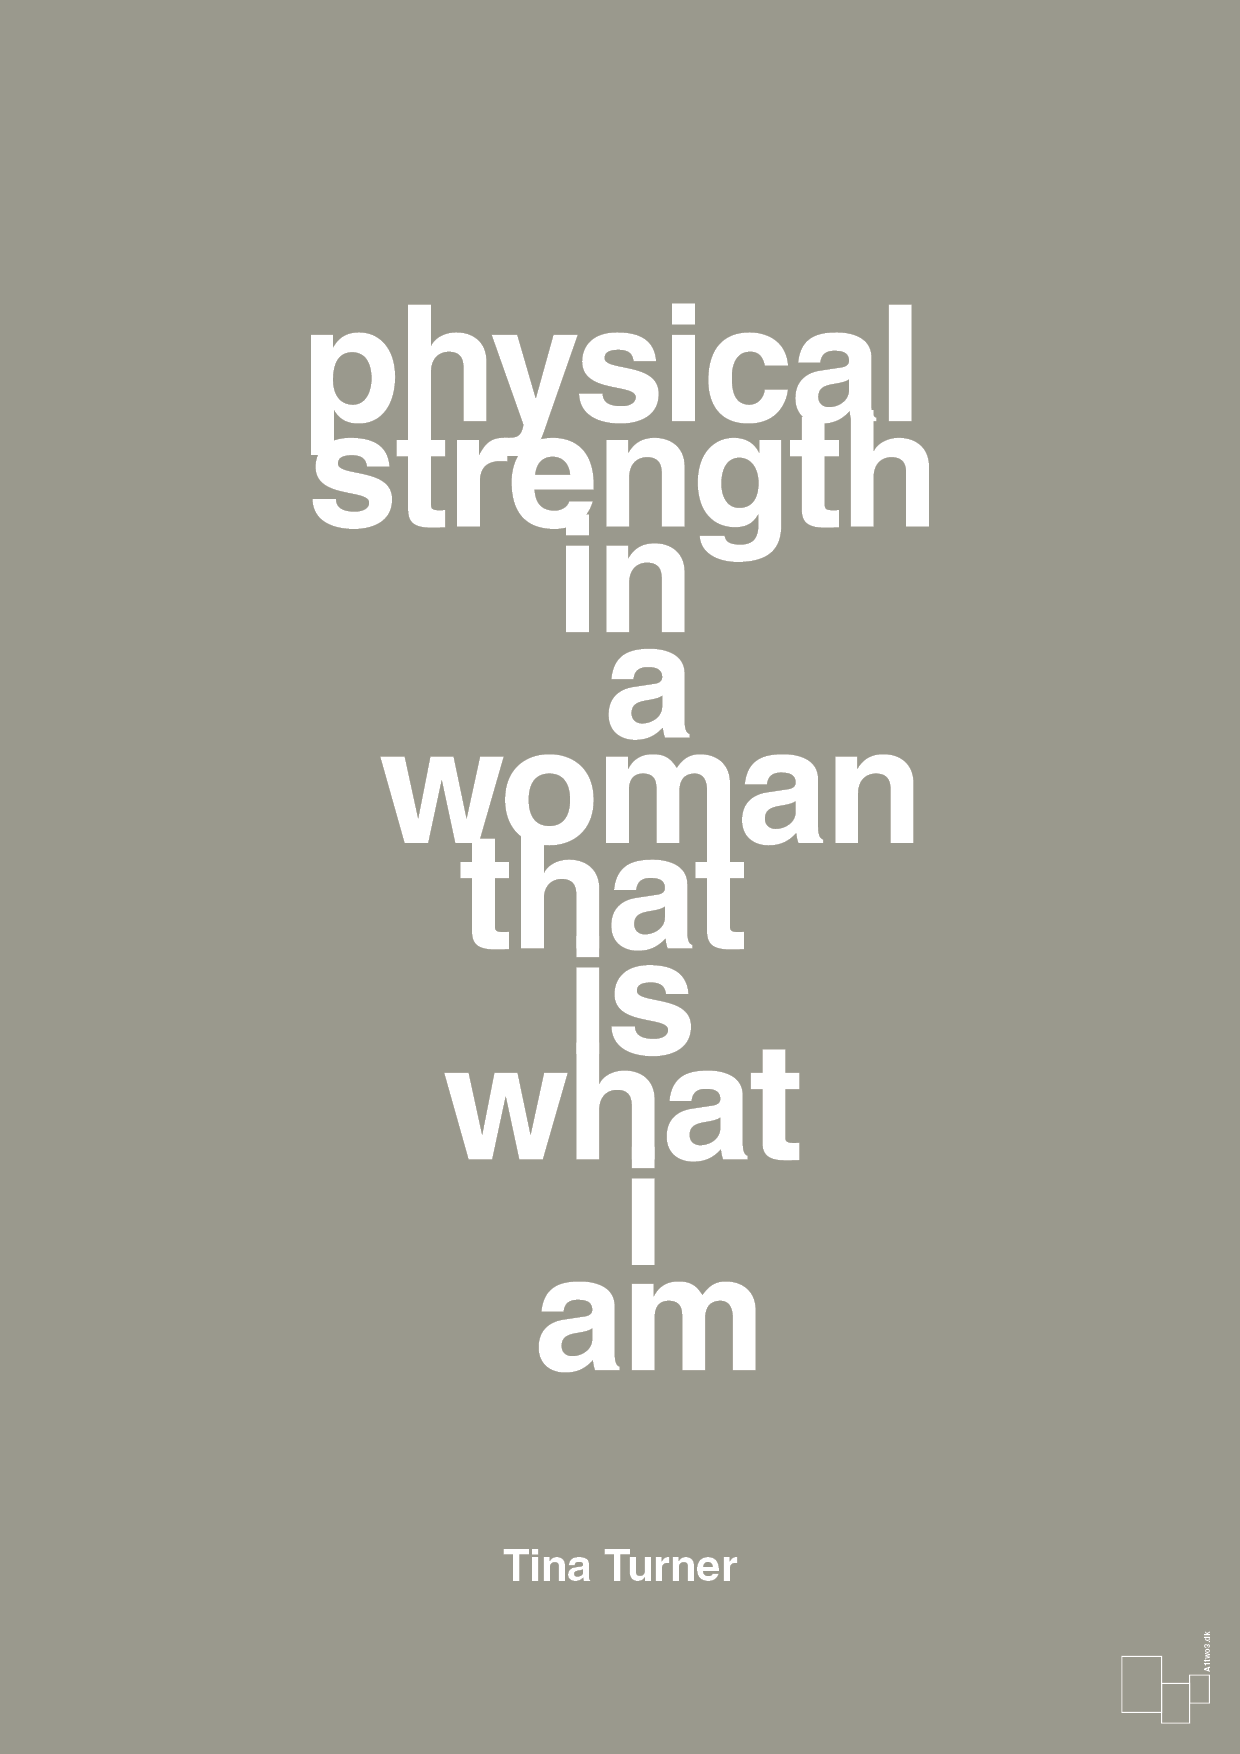 physical strength in a woman that’s what I am - Plakat med Citater i Battleship Gray